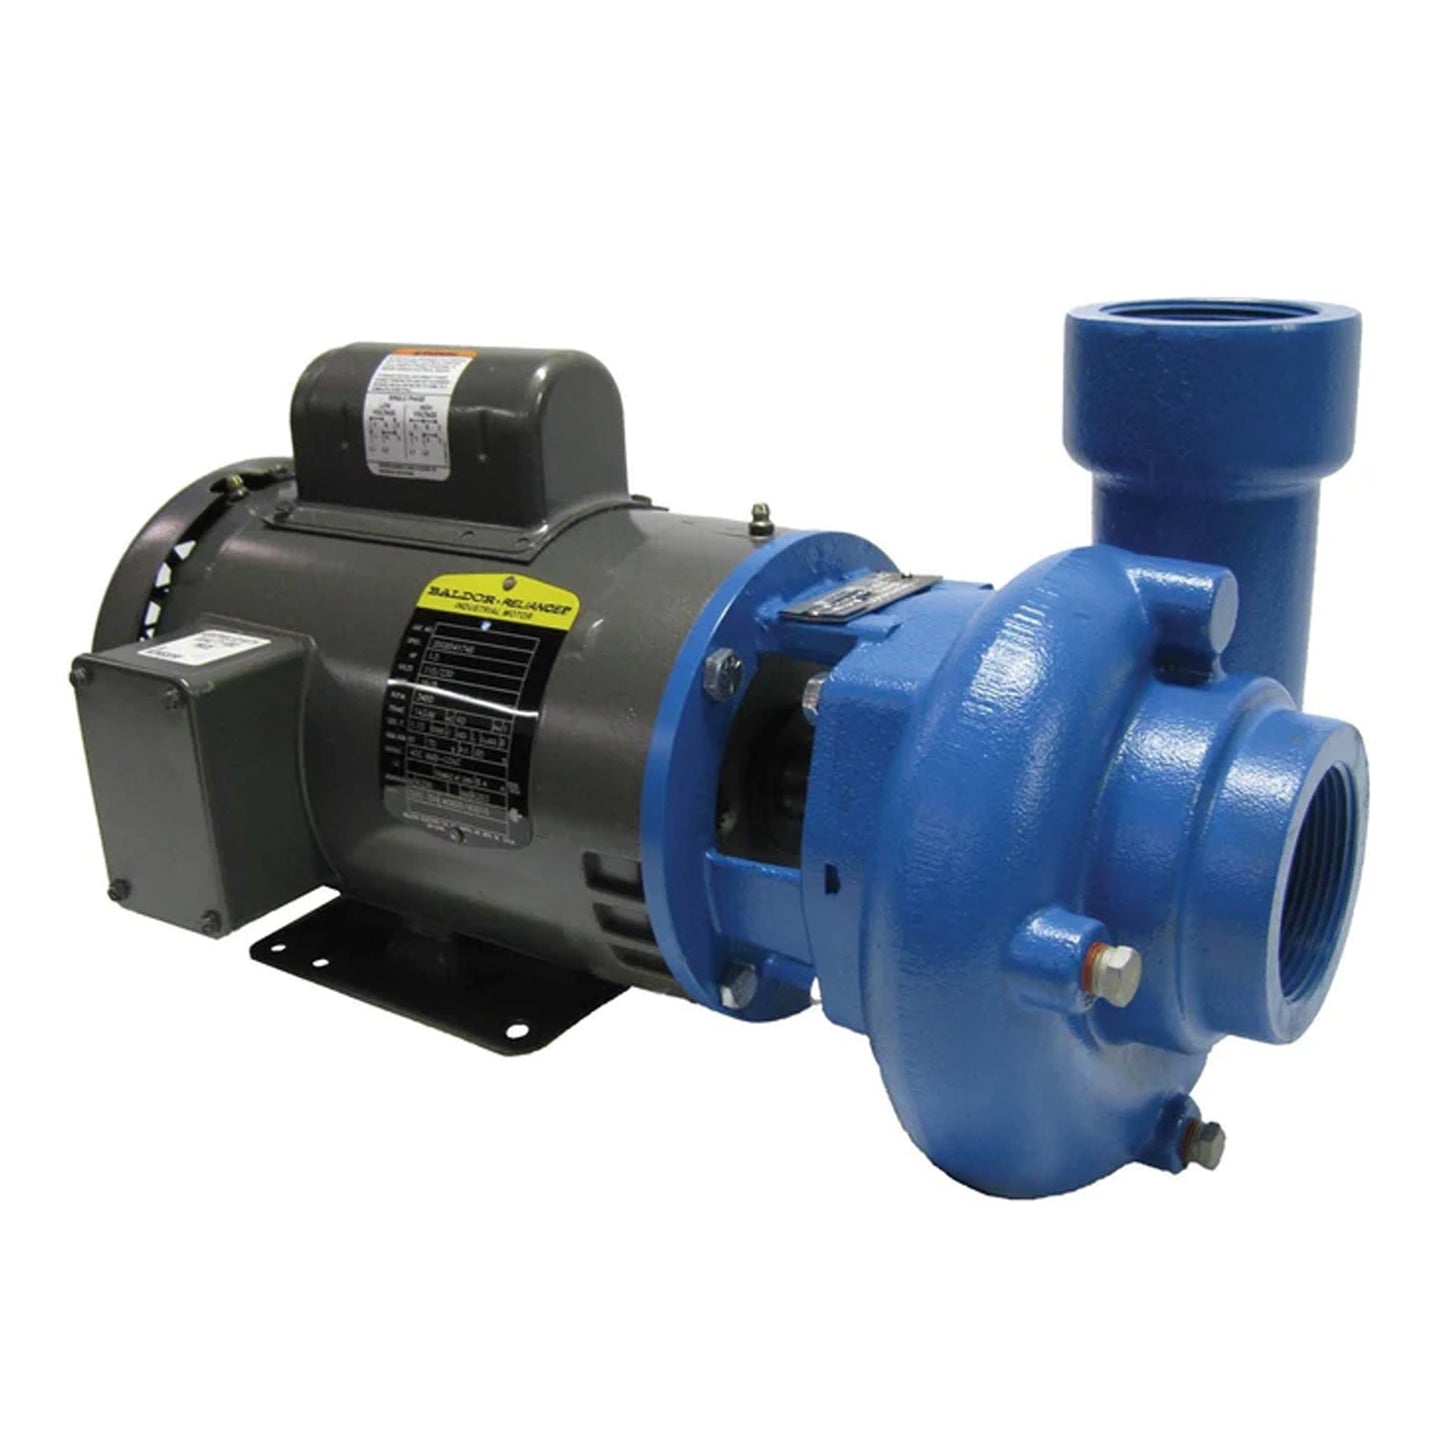 1.5 HP Goulds High Volume/Low-Head Pump - Living Water Aeration